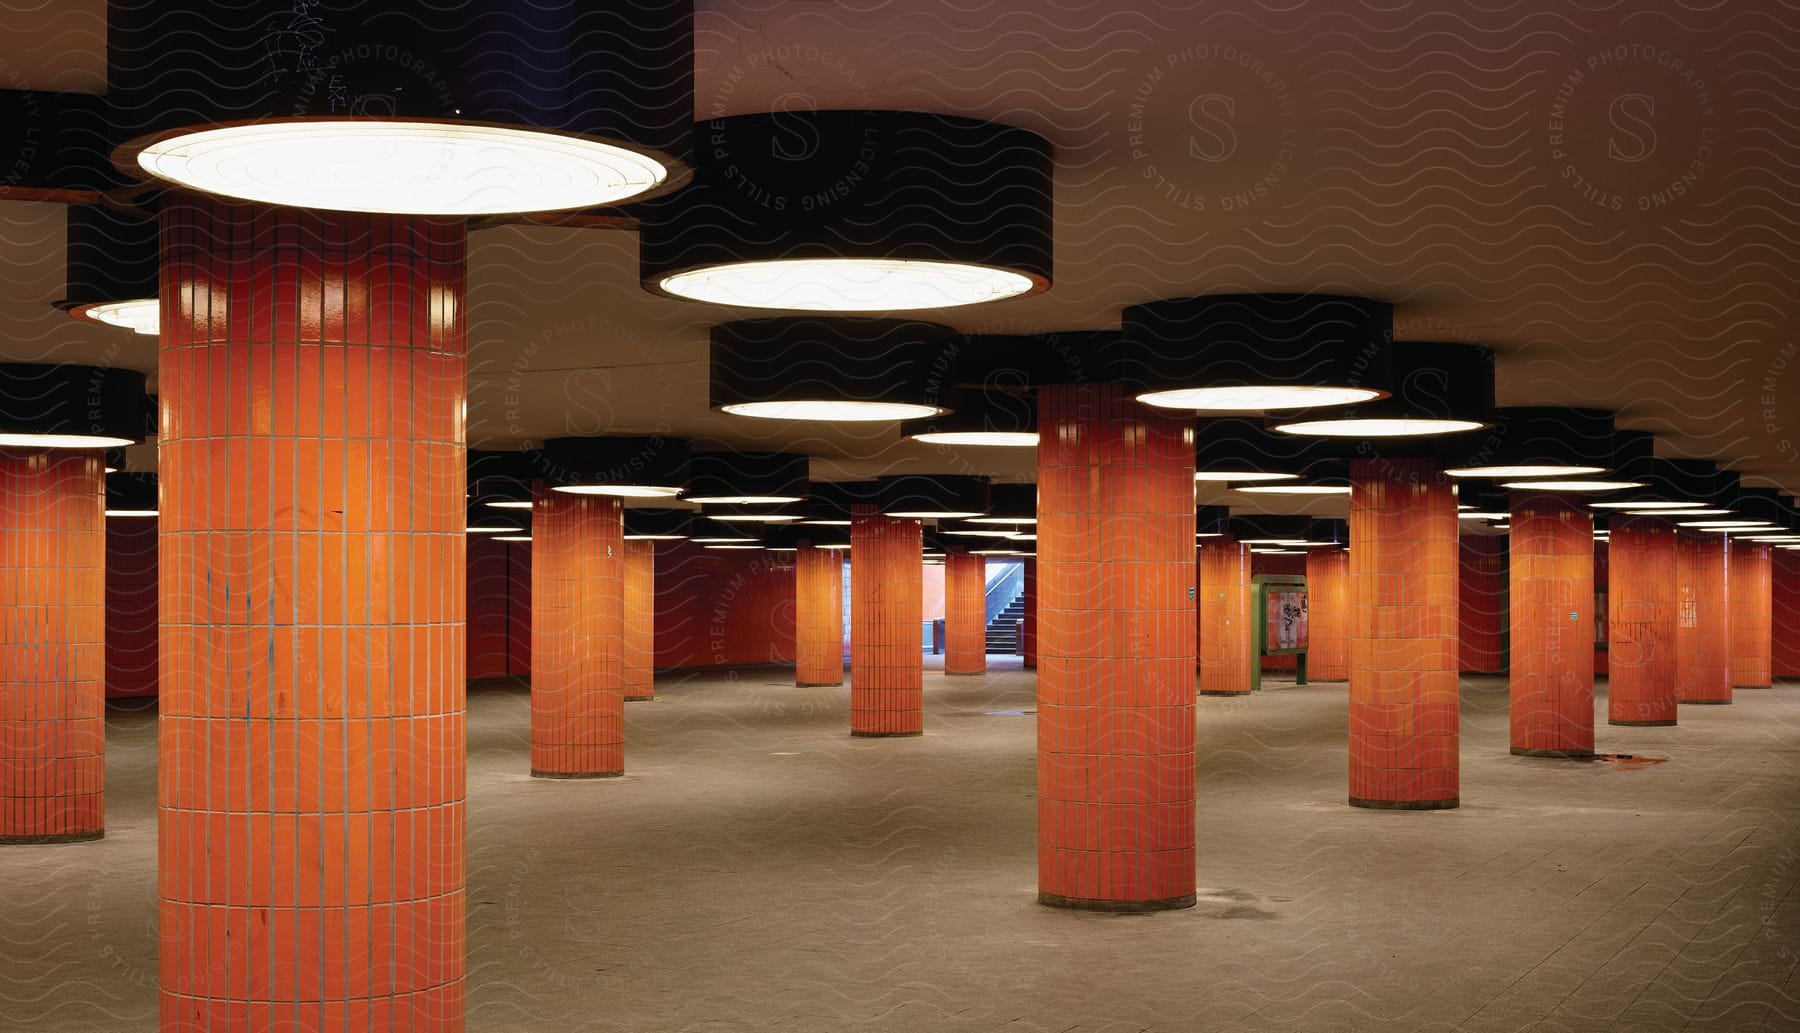 An empty underground parking lot with a series of red columns and round lights